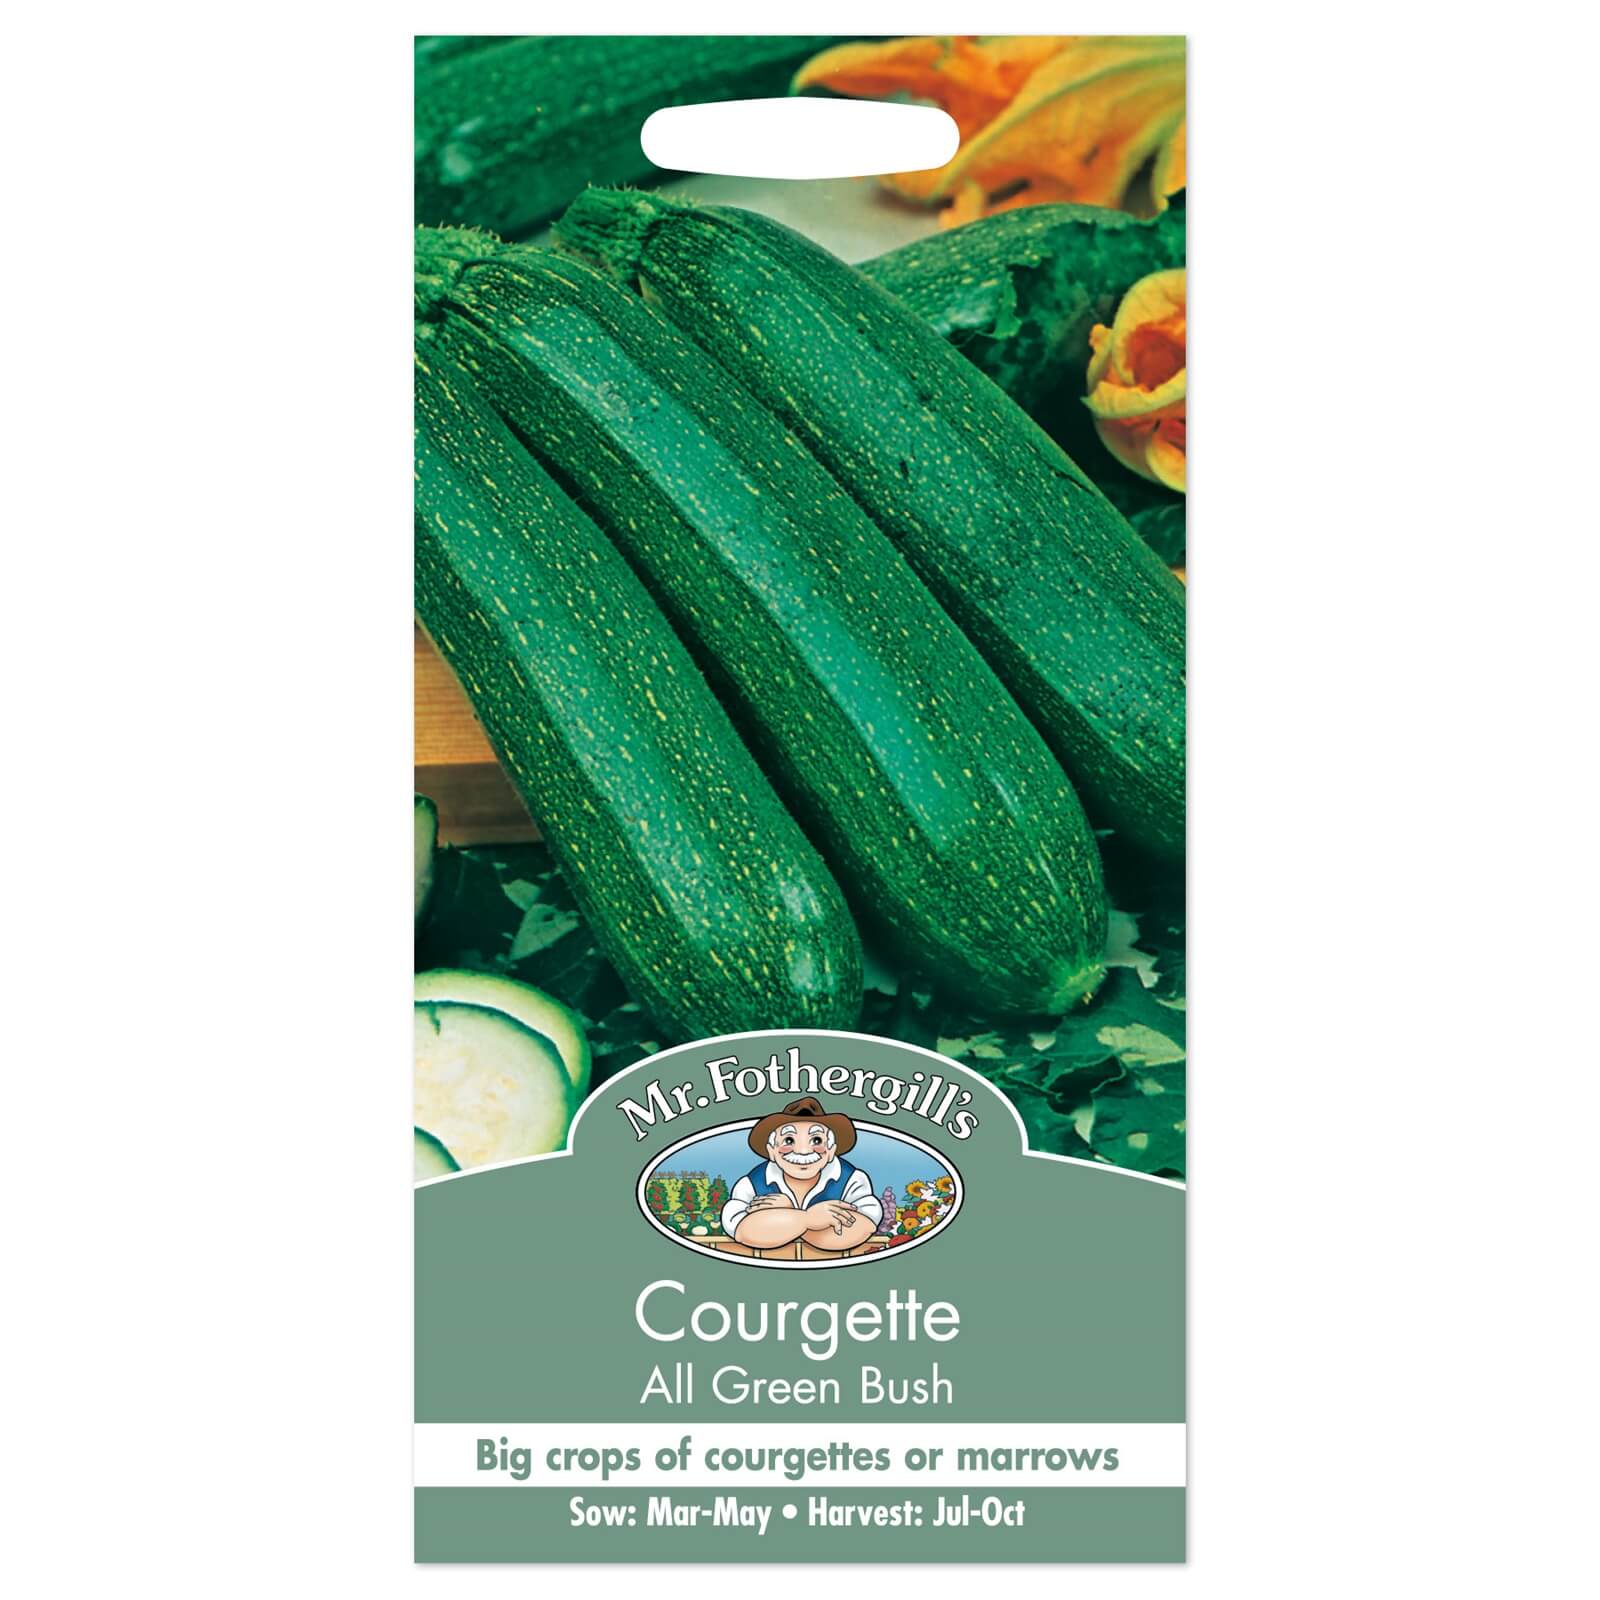 Mr. Fothergill's Courgette All Green Bush Seeds